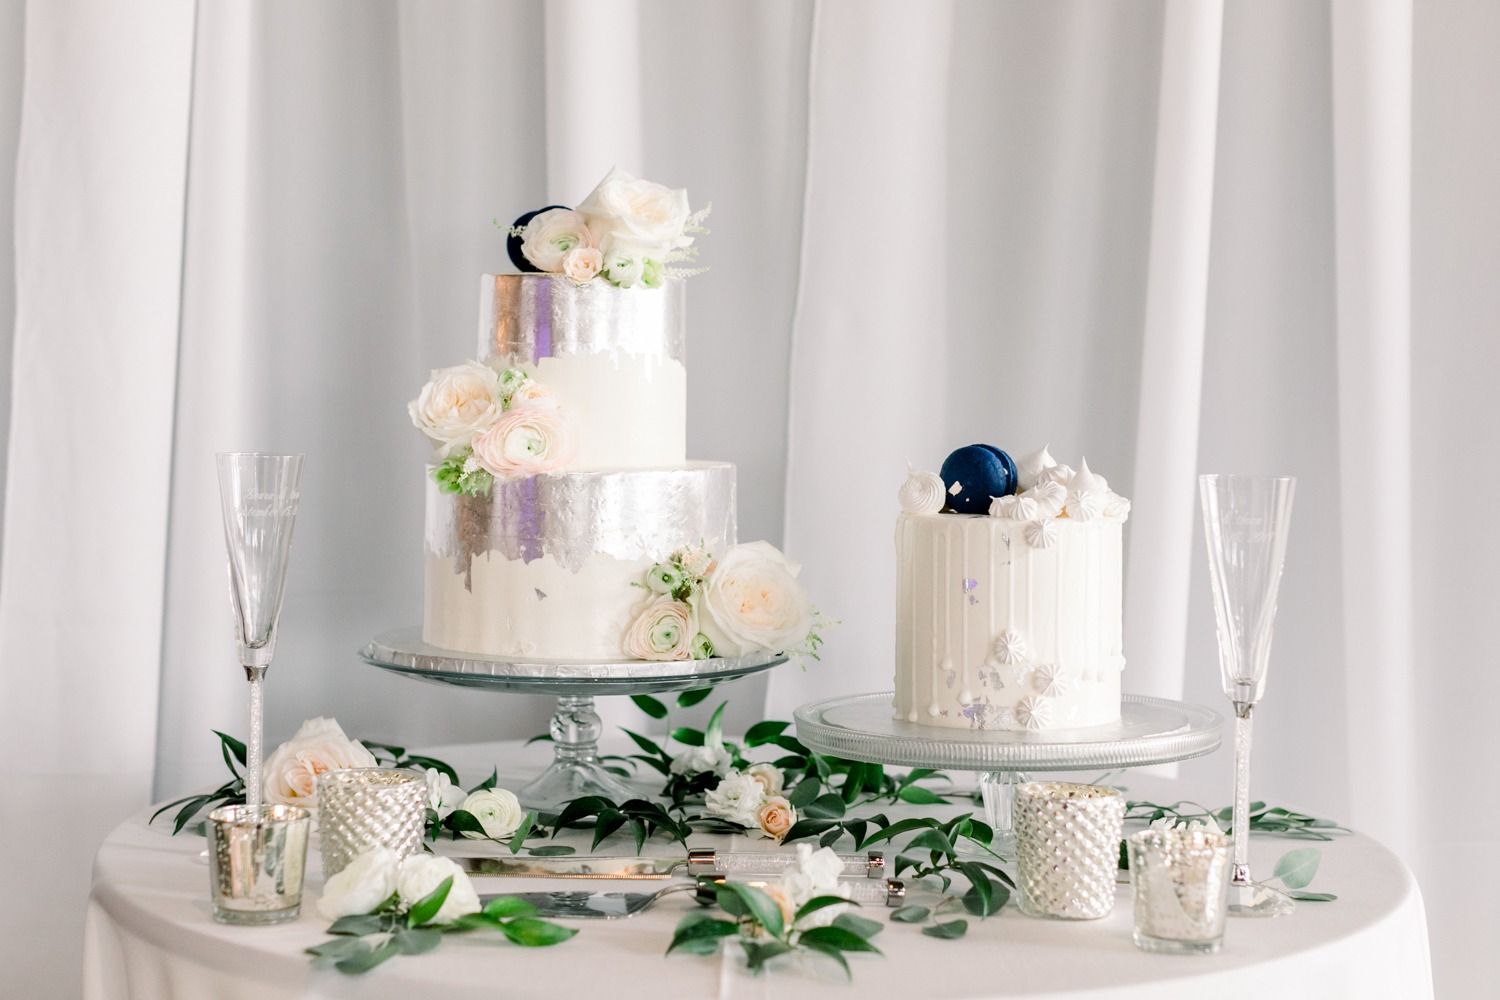 Silver and white wedding cakes